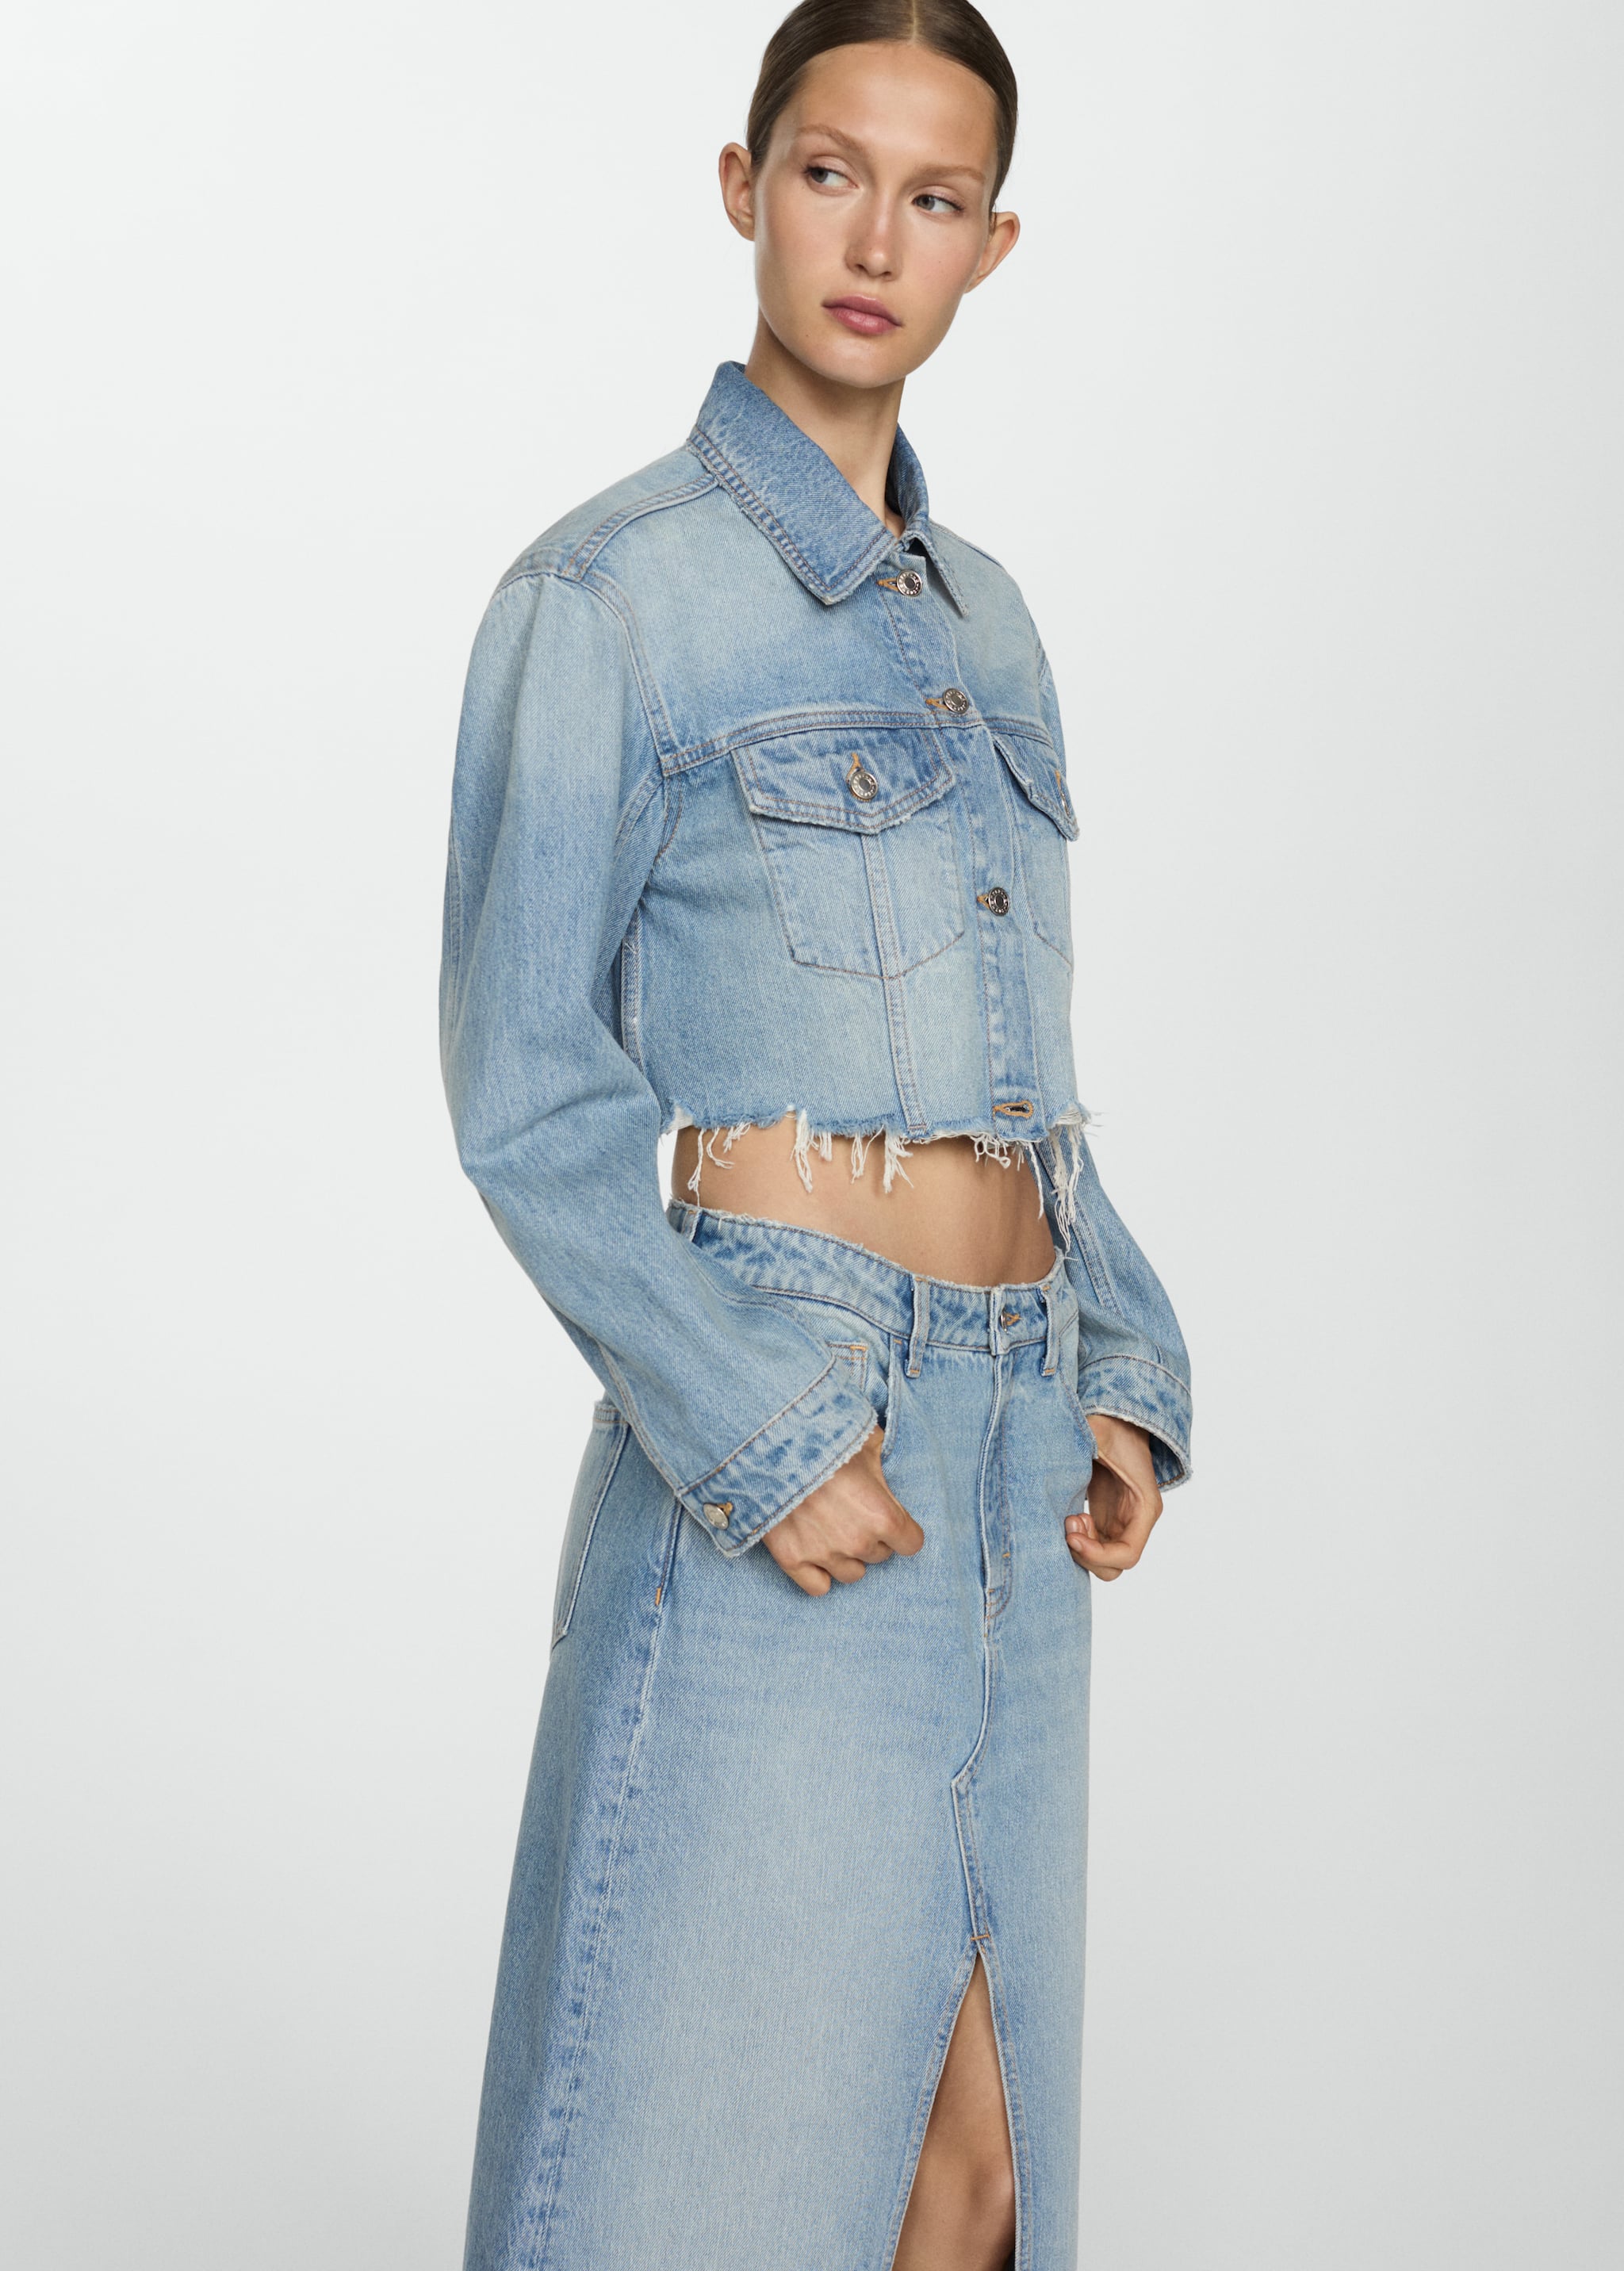 Denim skirt with frayed hem - Details of the article 1